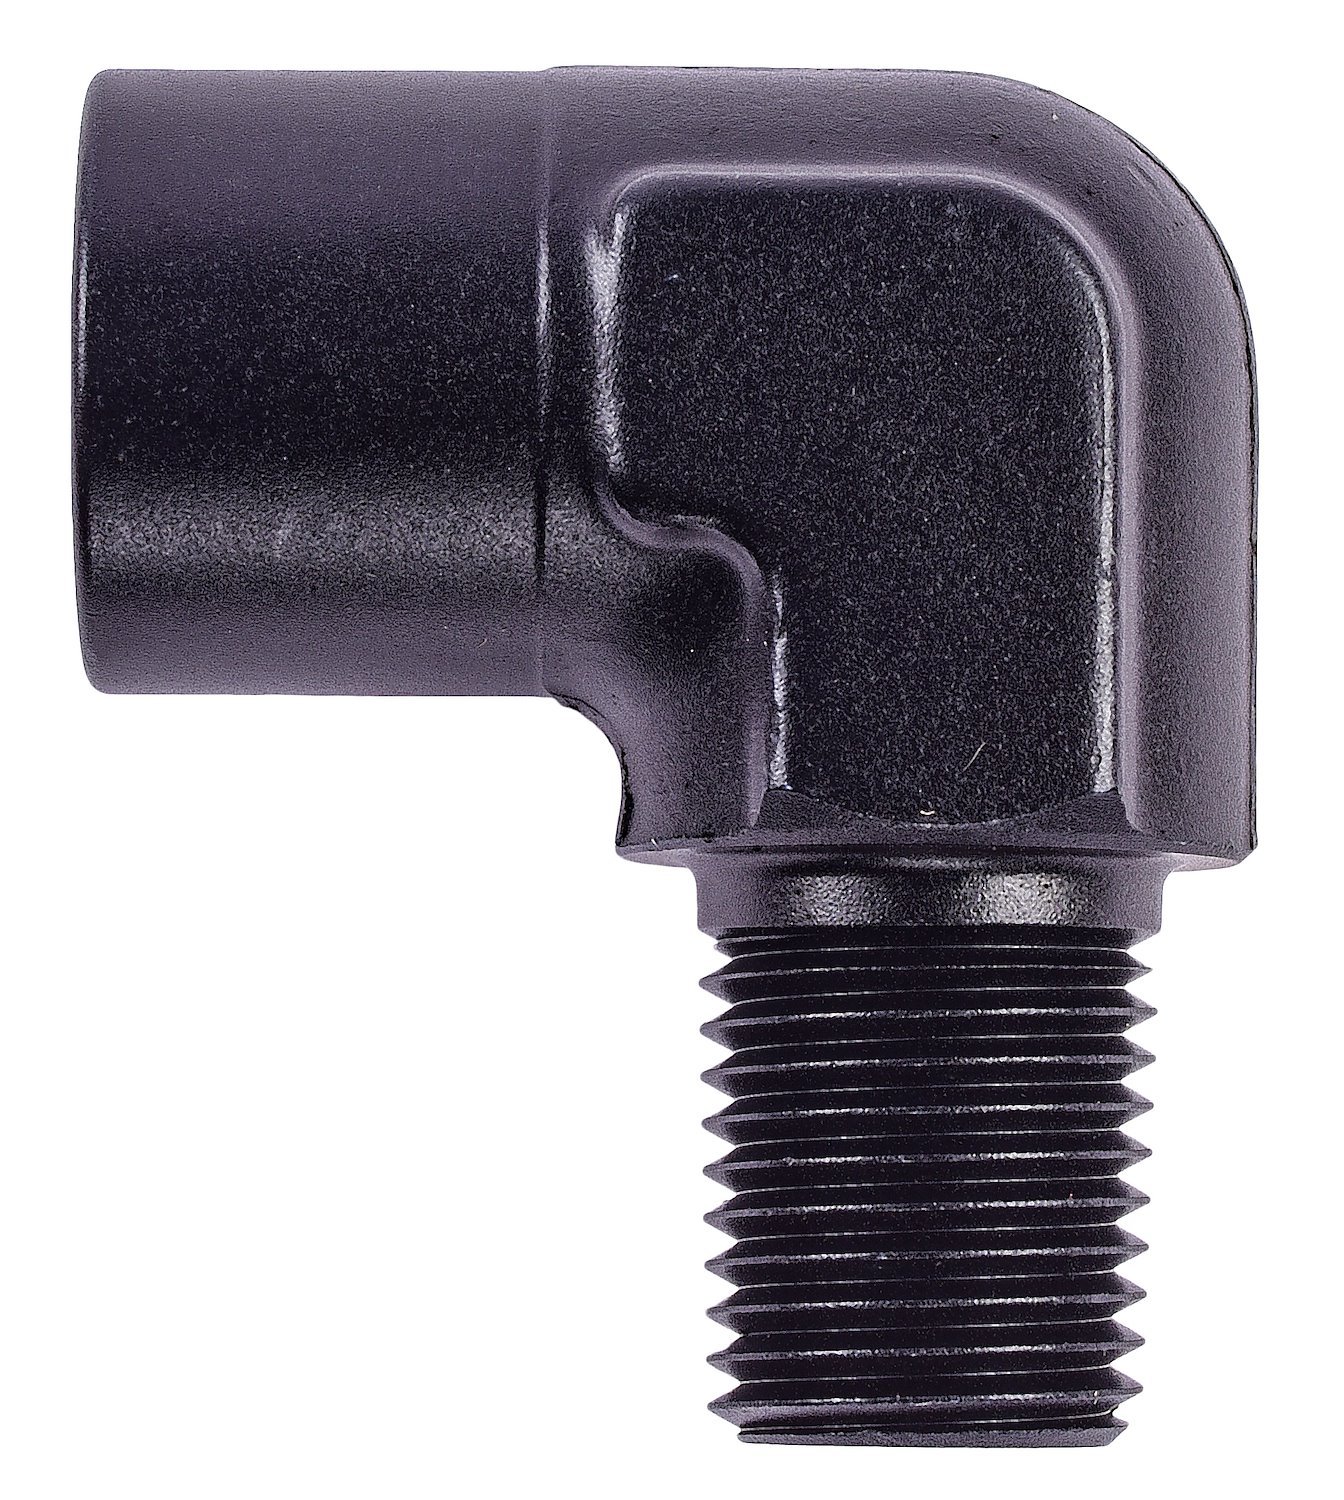 NPT to NPT 90-Degree Adapter Fitting [1/8 in. NPT Male to 1/8 in. NPT Female, Black]